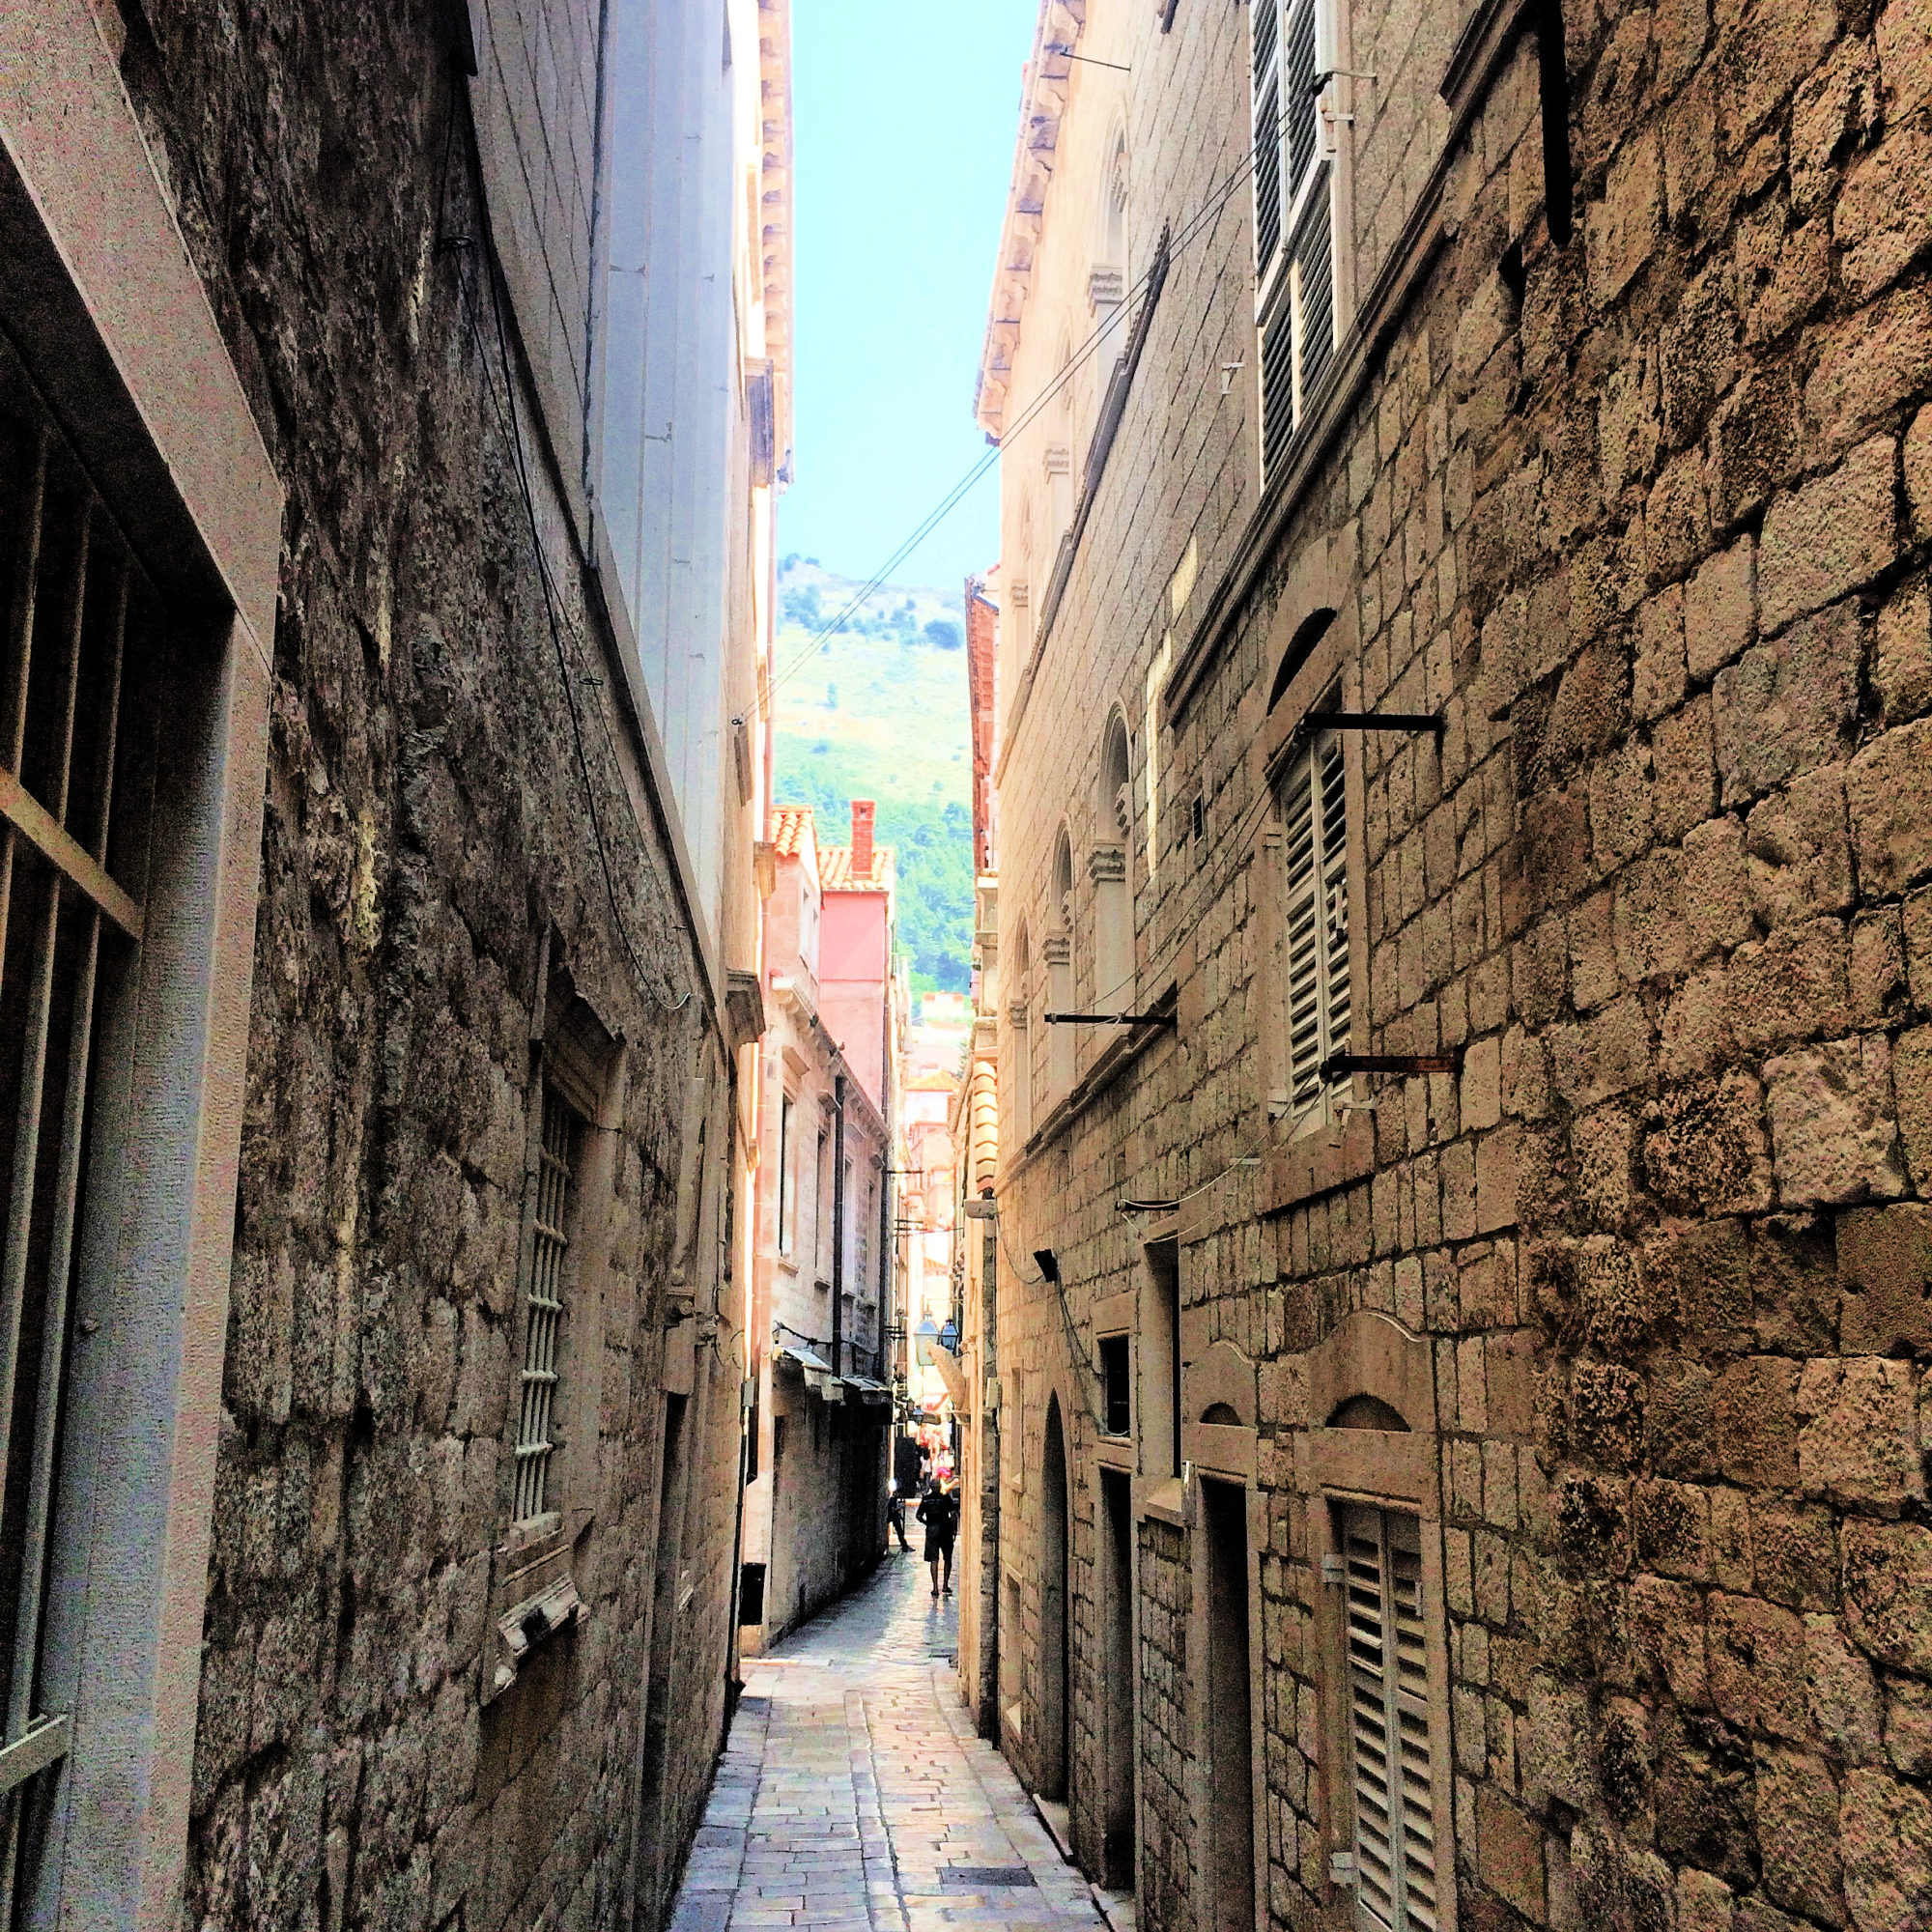 Dubrovnik's Old Town